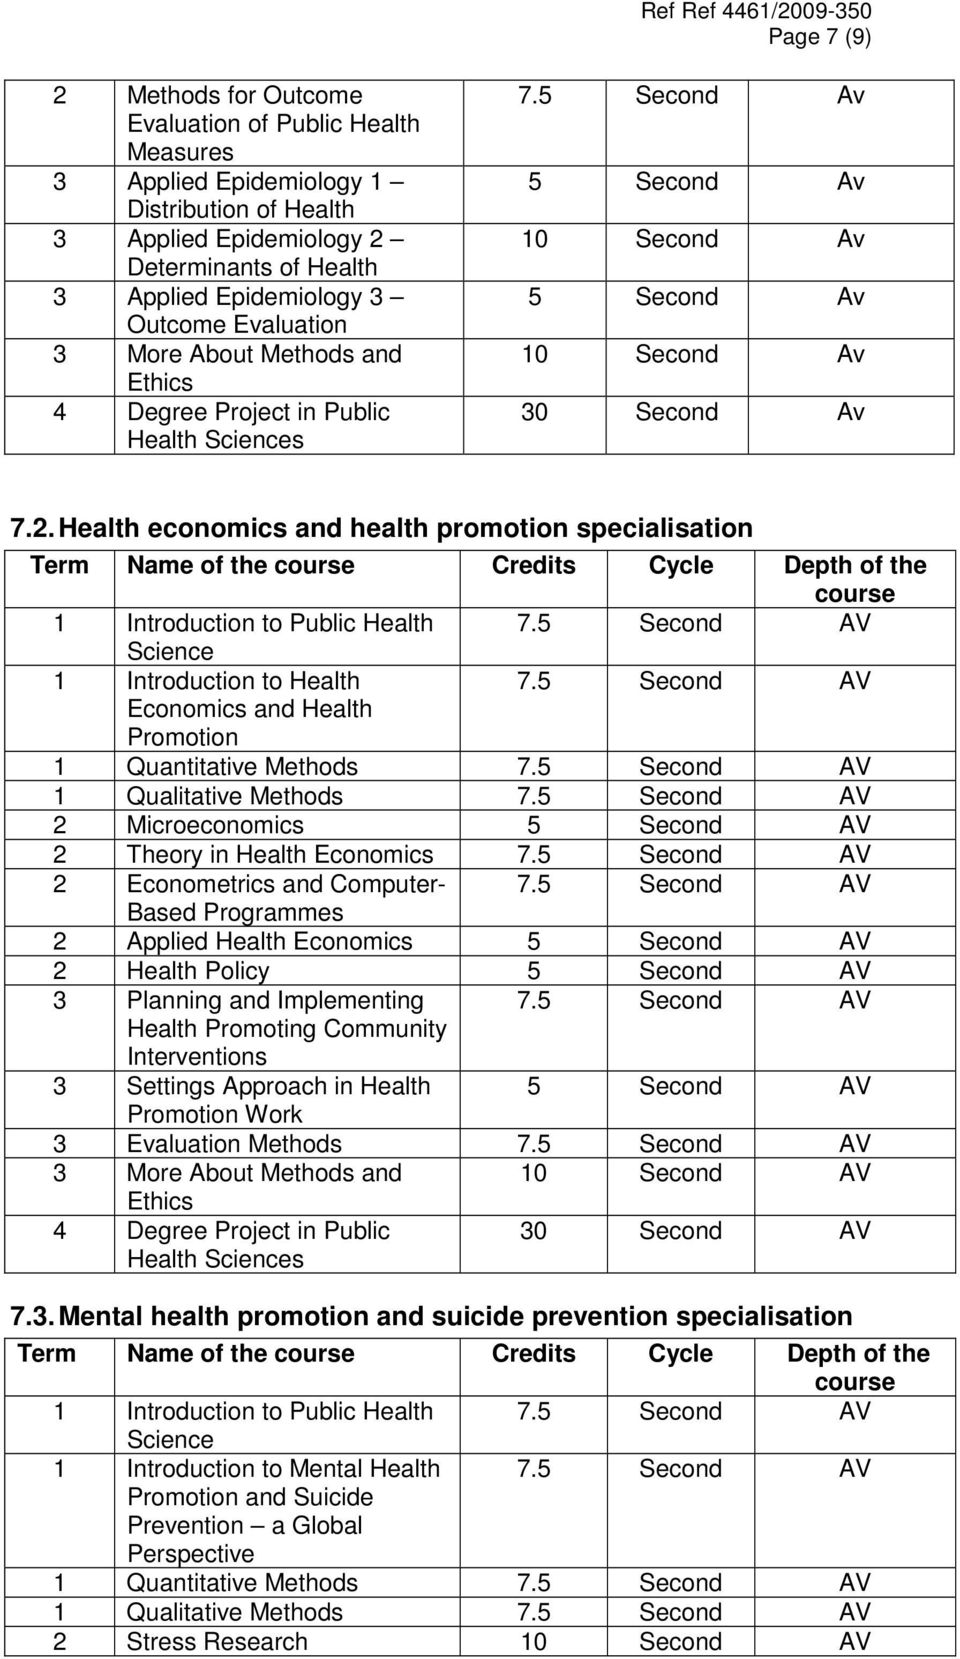 Health economics and health promotion specialisation Term Name of the Credits Cycle Depth of the 1 Introduction to Public Health 7.5 Second AV 1 Introduction to Health 7.